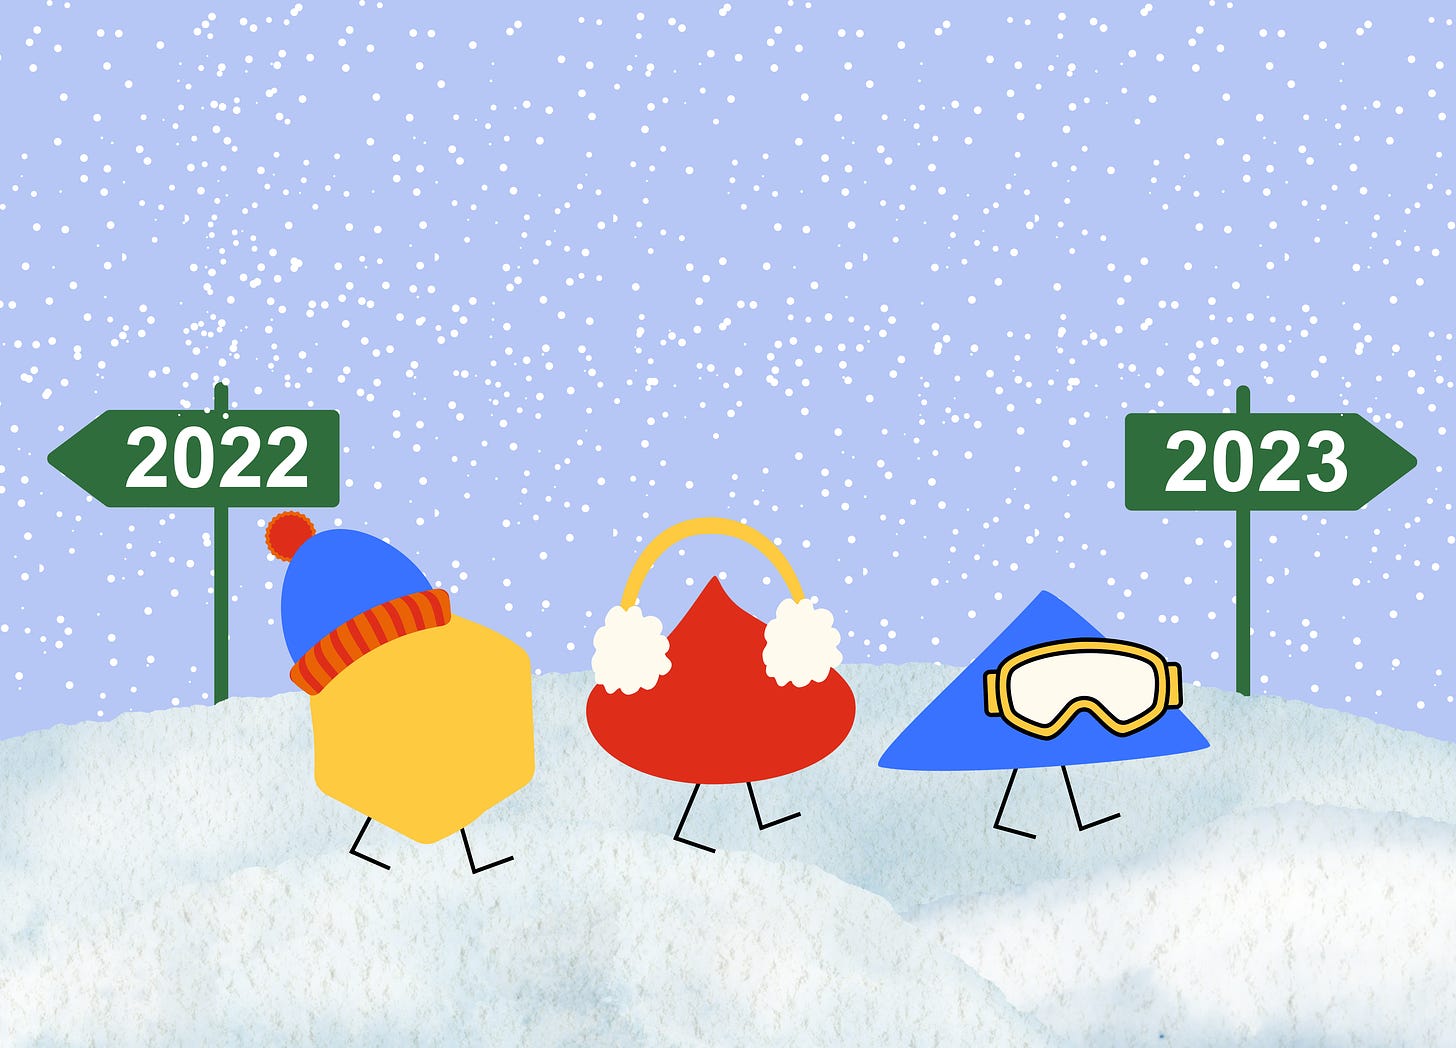 A graphic of three dumpling shapes with legs, wearing winter accessories, walking in the snow away from a sign that says 2022 and toward a sign that says 2023